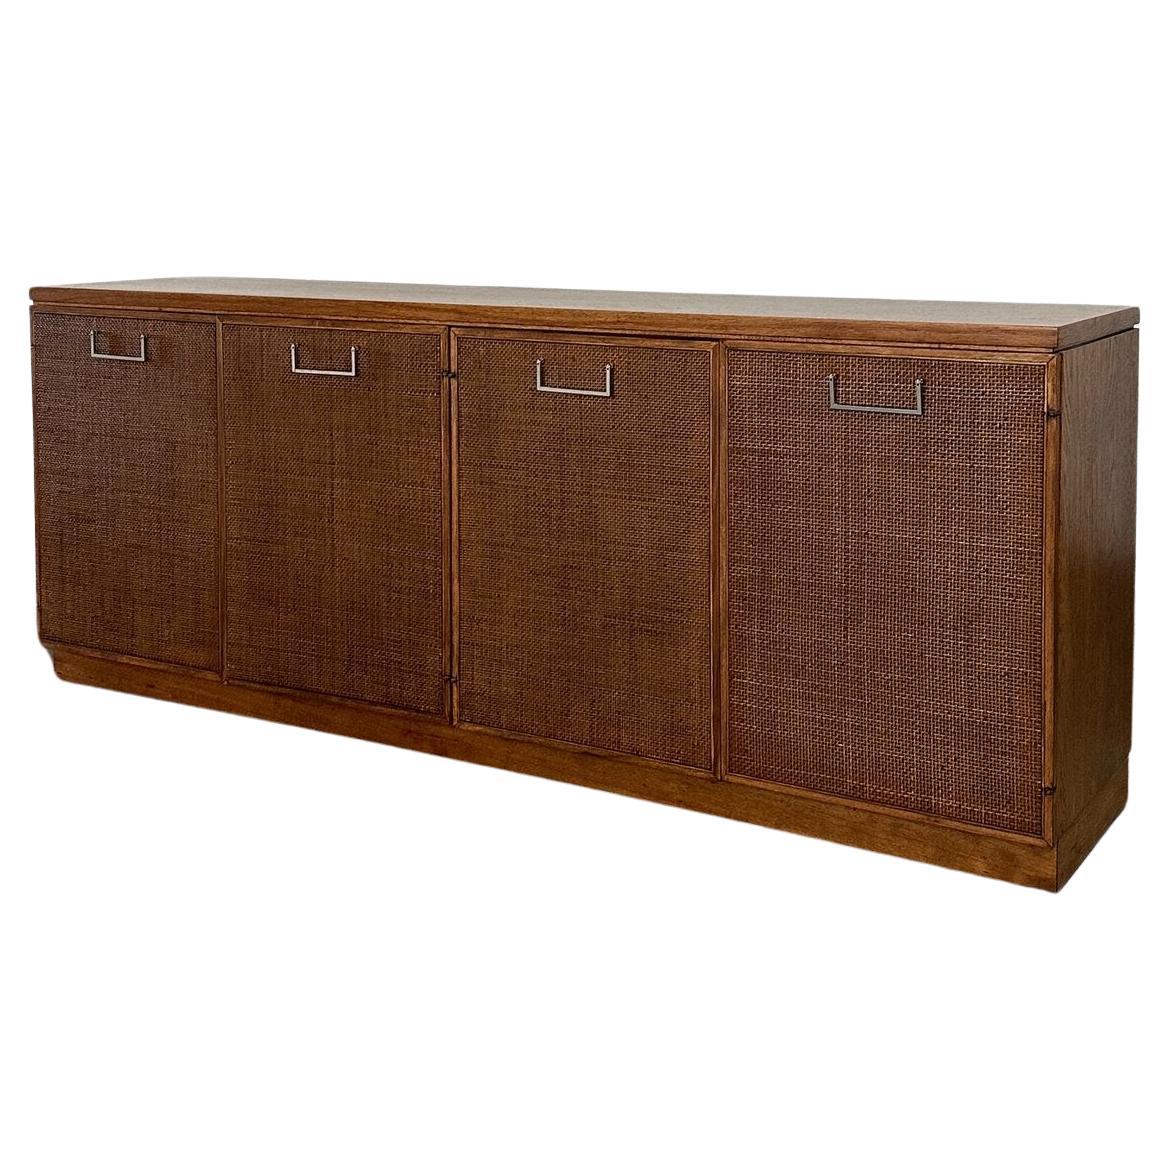 Founders Four Door Cane Front Credenza